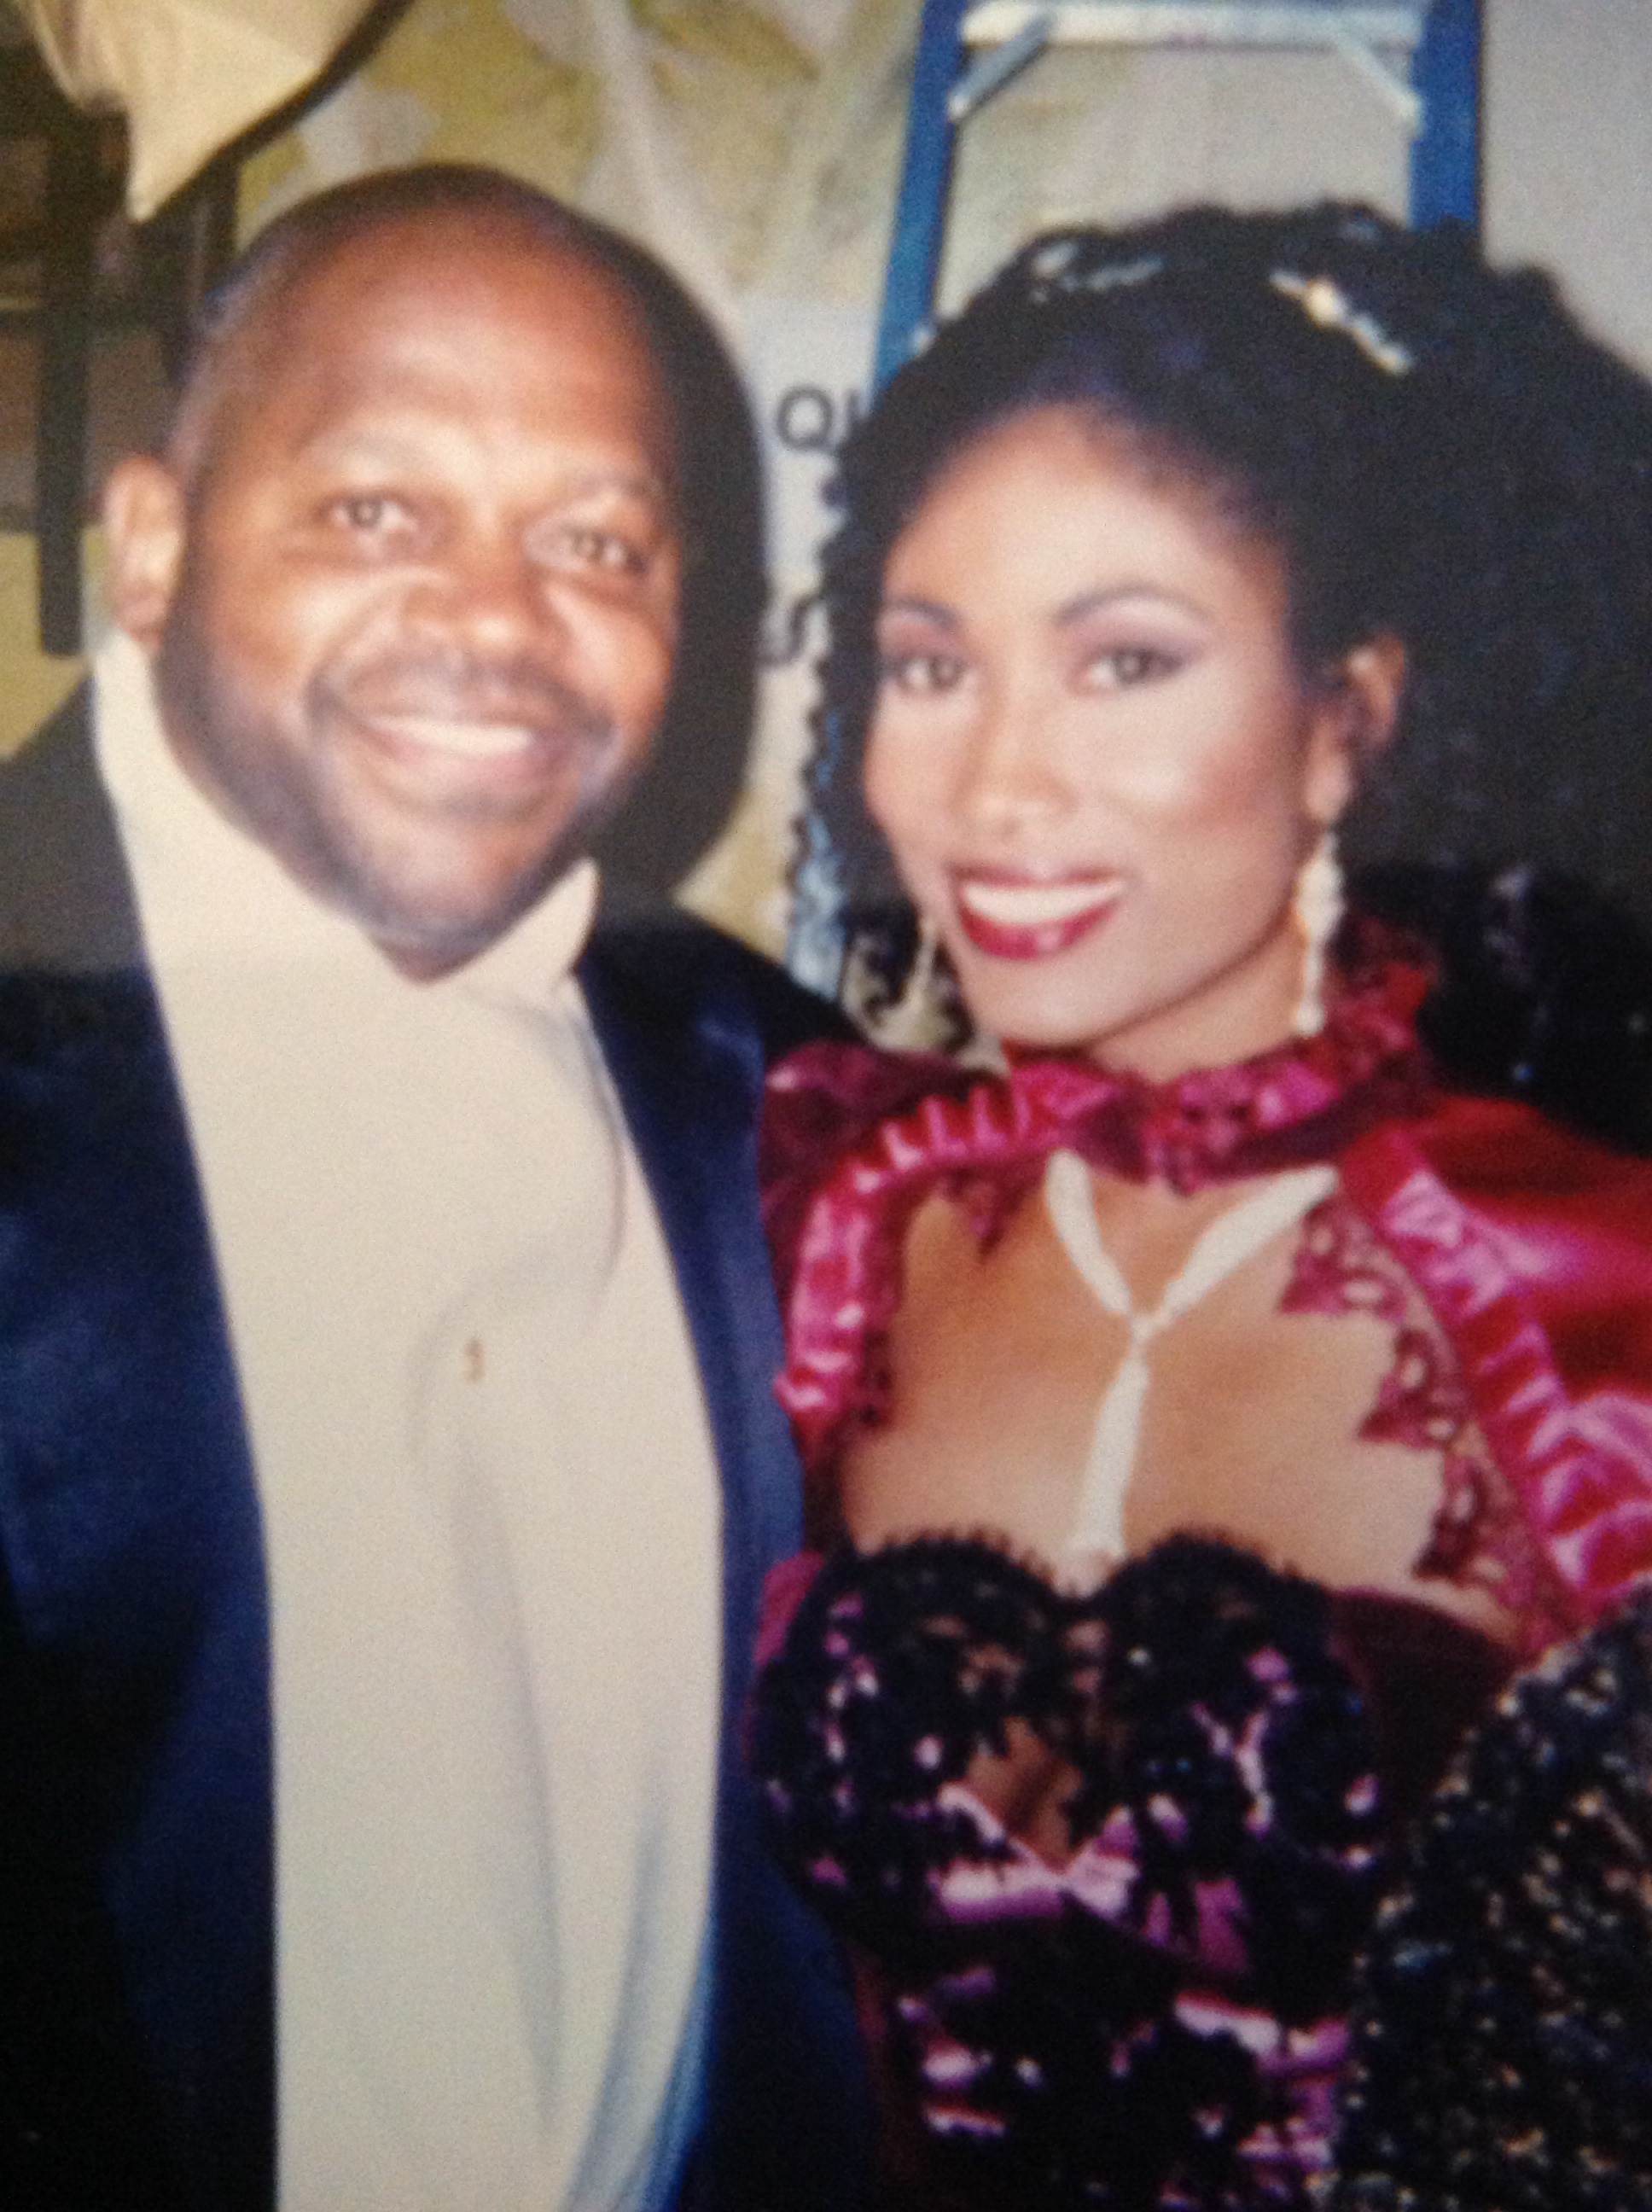 Throwback pic - 1998 with Mr. Charles Dutton in AN EVENING OF SHAKESPEARE WITH CHARLES DUTTON. I had the pleasure of playing opposite Charles as his Lady Macbeth.